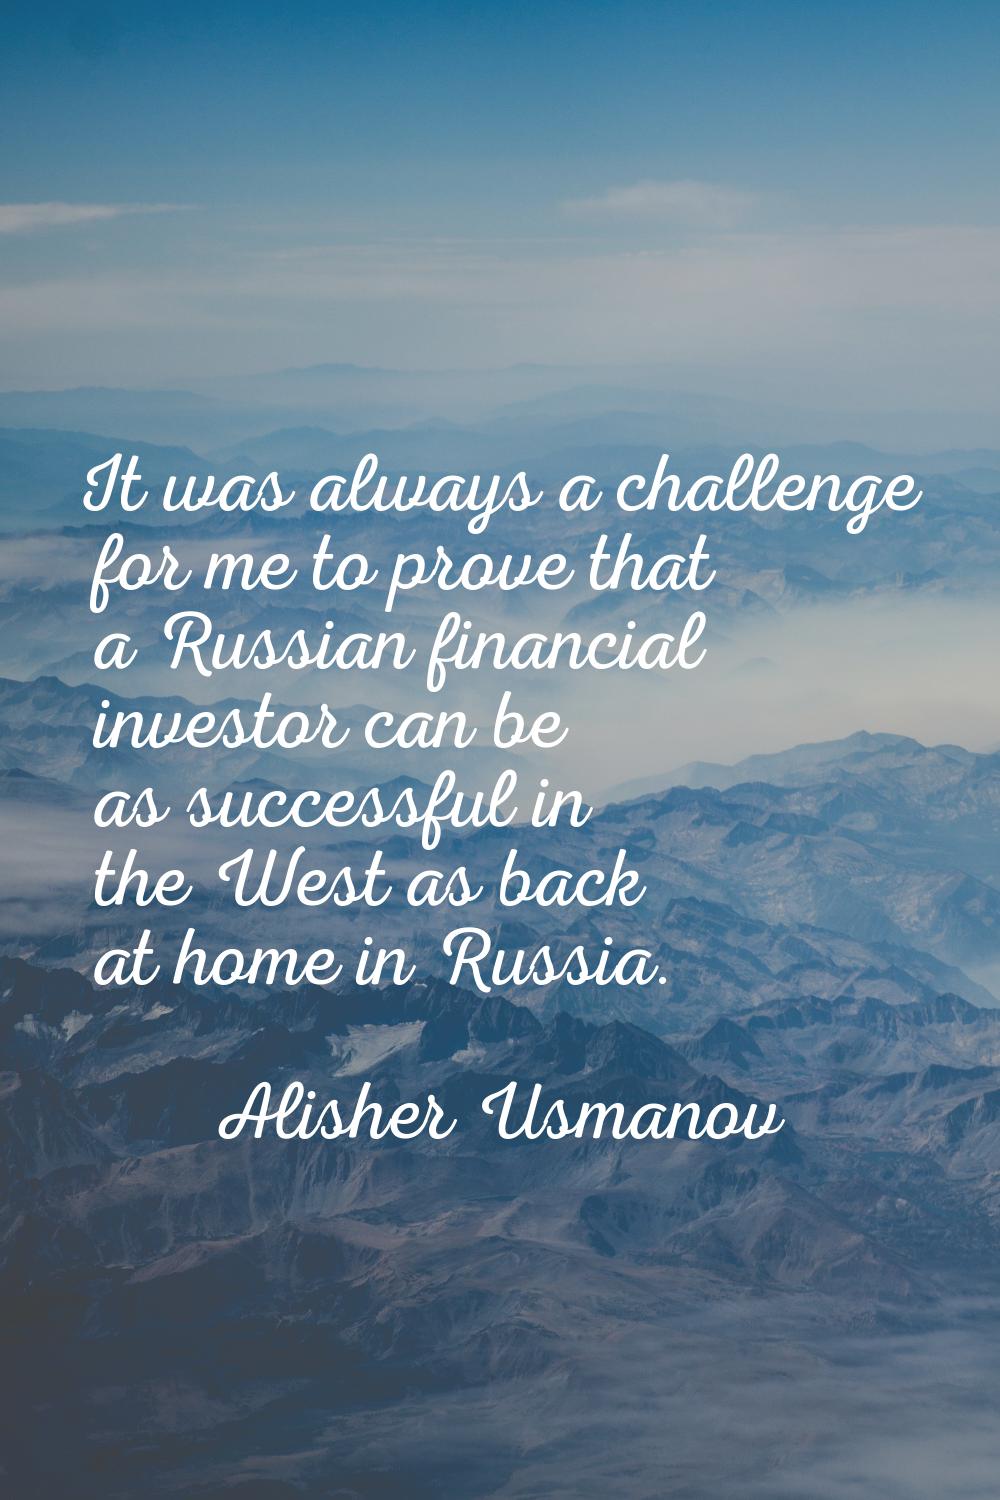 It was always a challenge for me to prove that a Russian financial investor can be as successful in